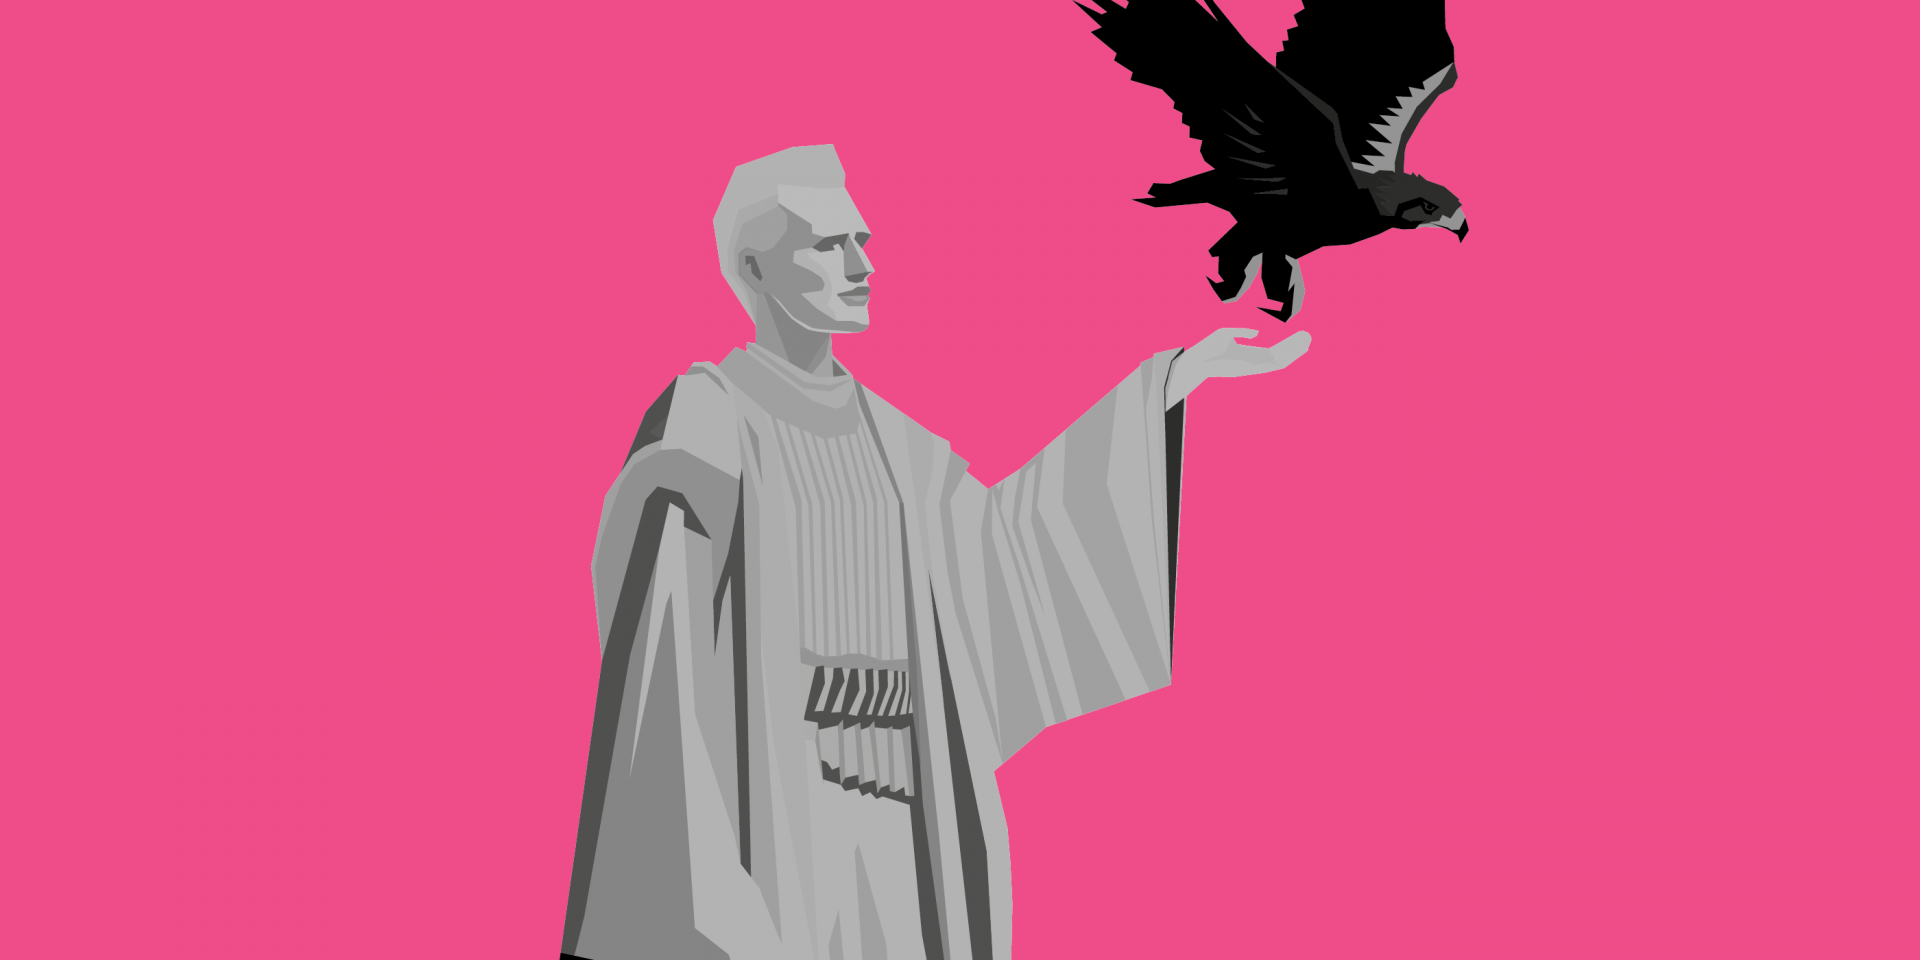 The drawing in comic style shows an androgynous figure in profile on magenta background. She wears a bright frock, her left hand is raised. An eagle has just flown out of her hand